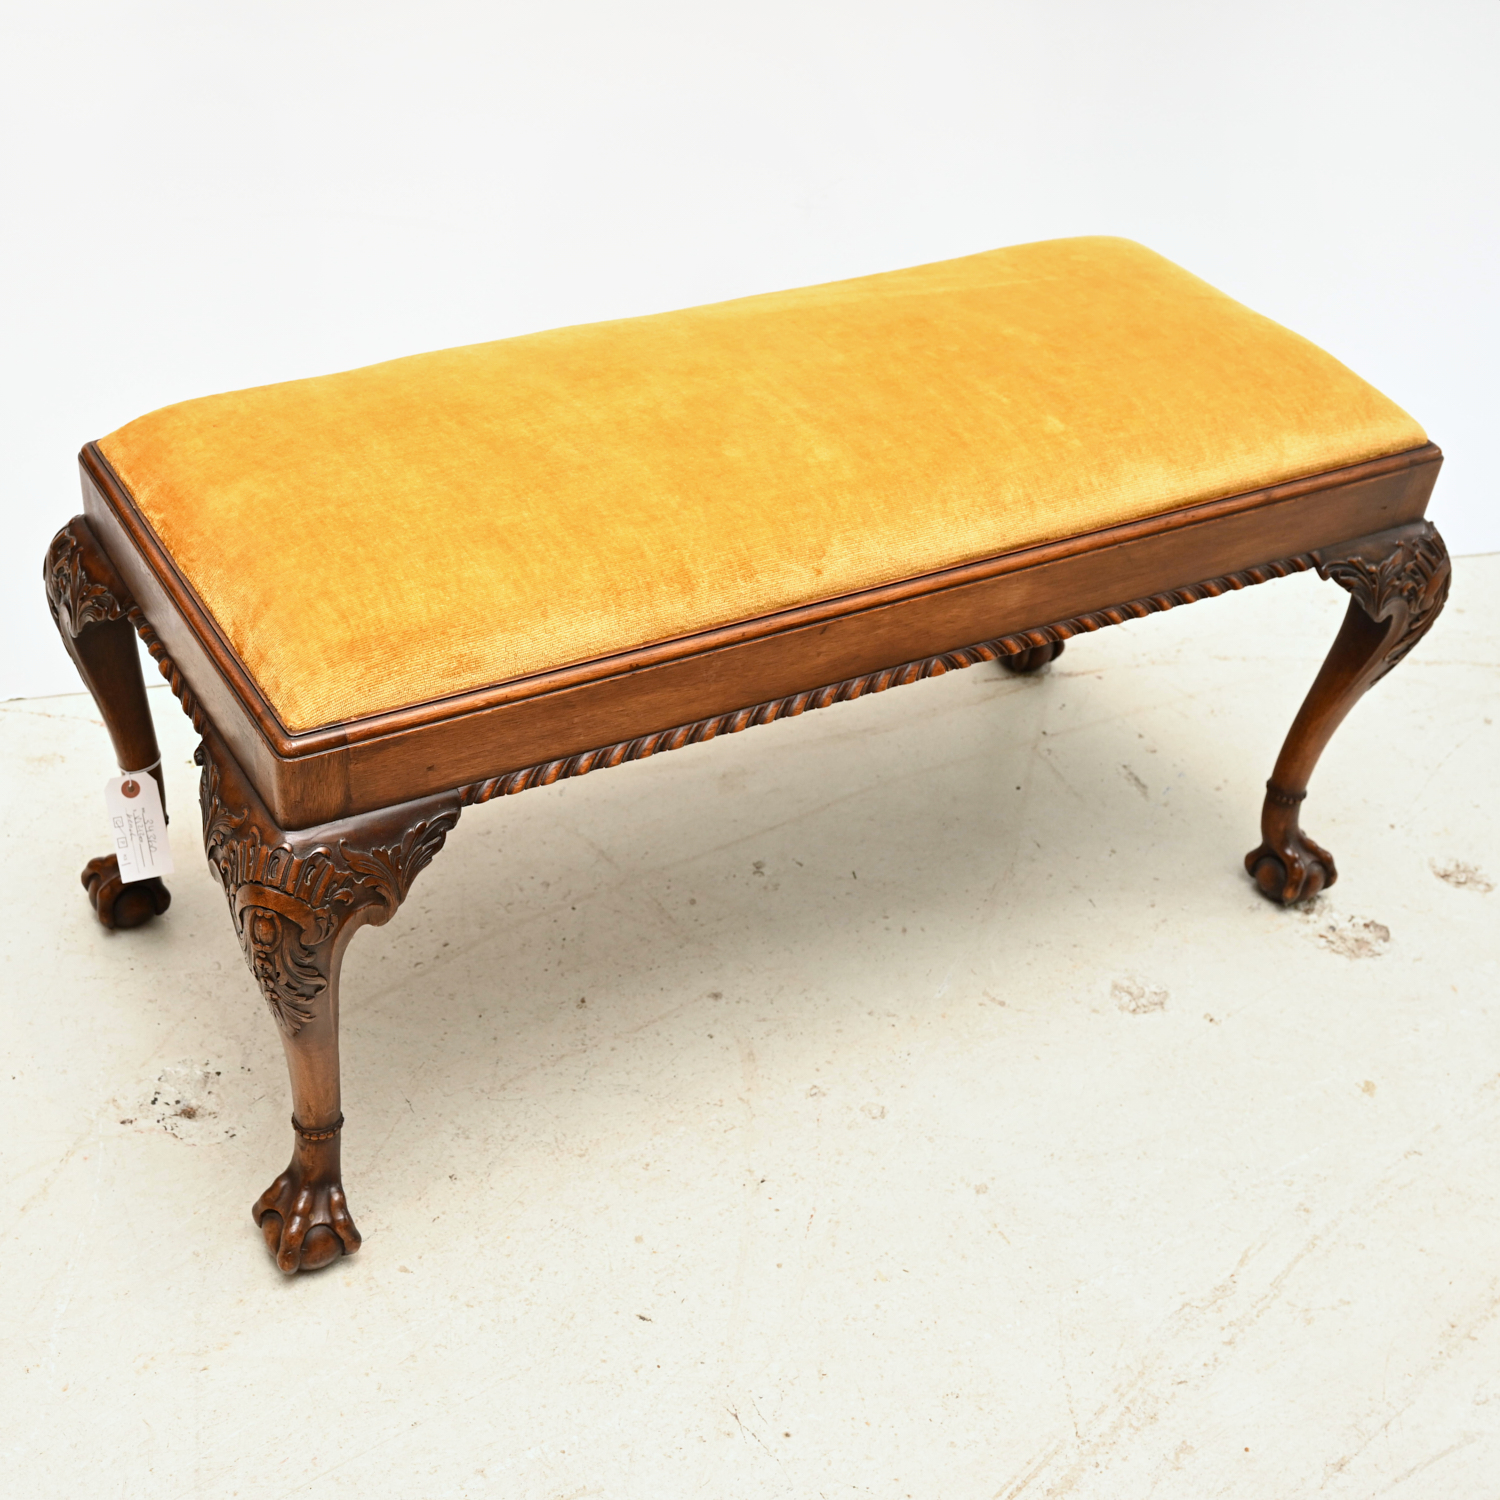 CHIPPENDALE STYLE UPHOLSTERED BENCH